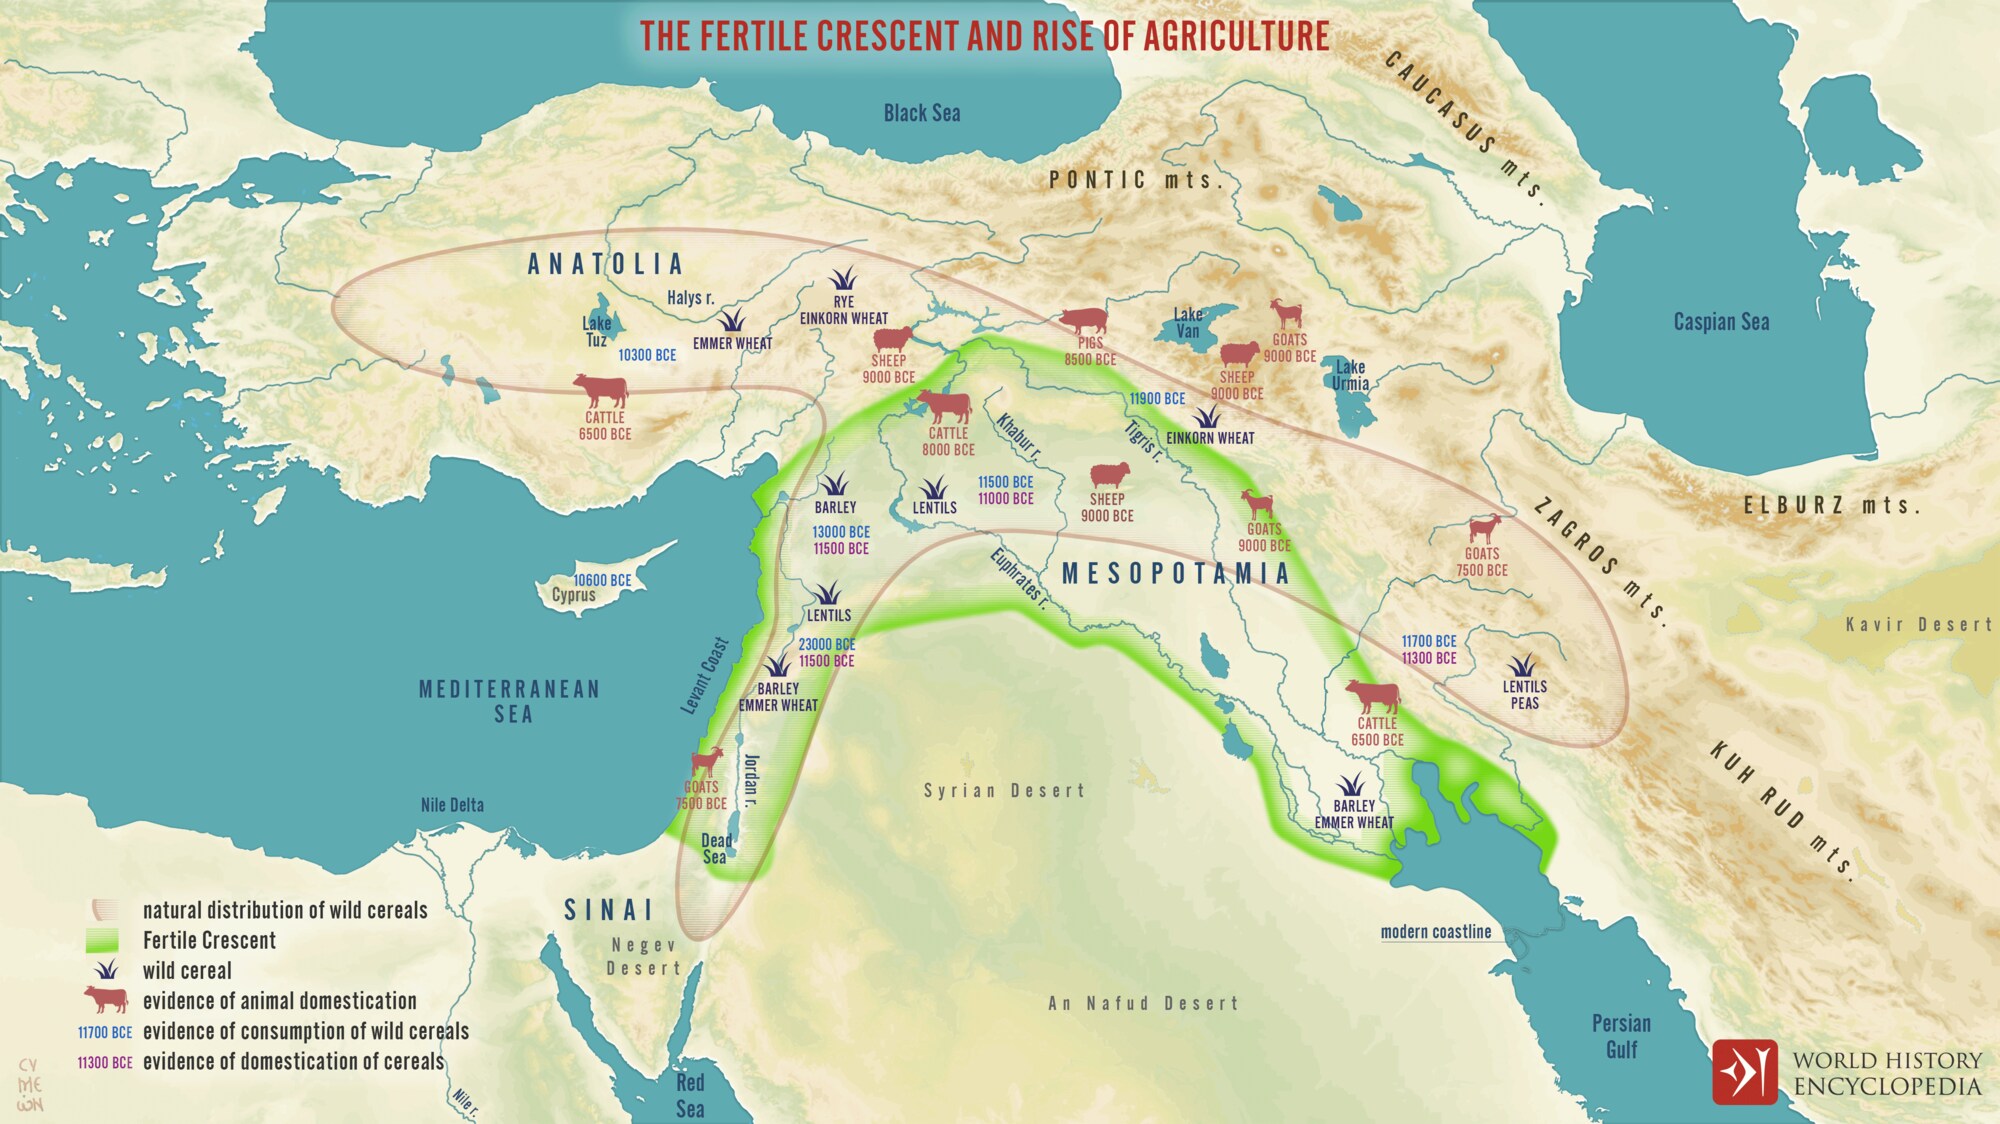 Map of the fertile crescent showing the distribution of the grains wheat, rye, and barley was harvested.